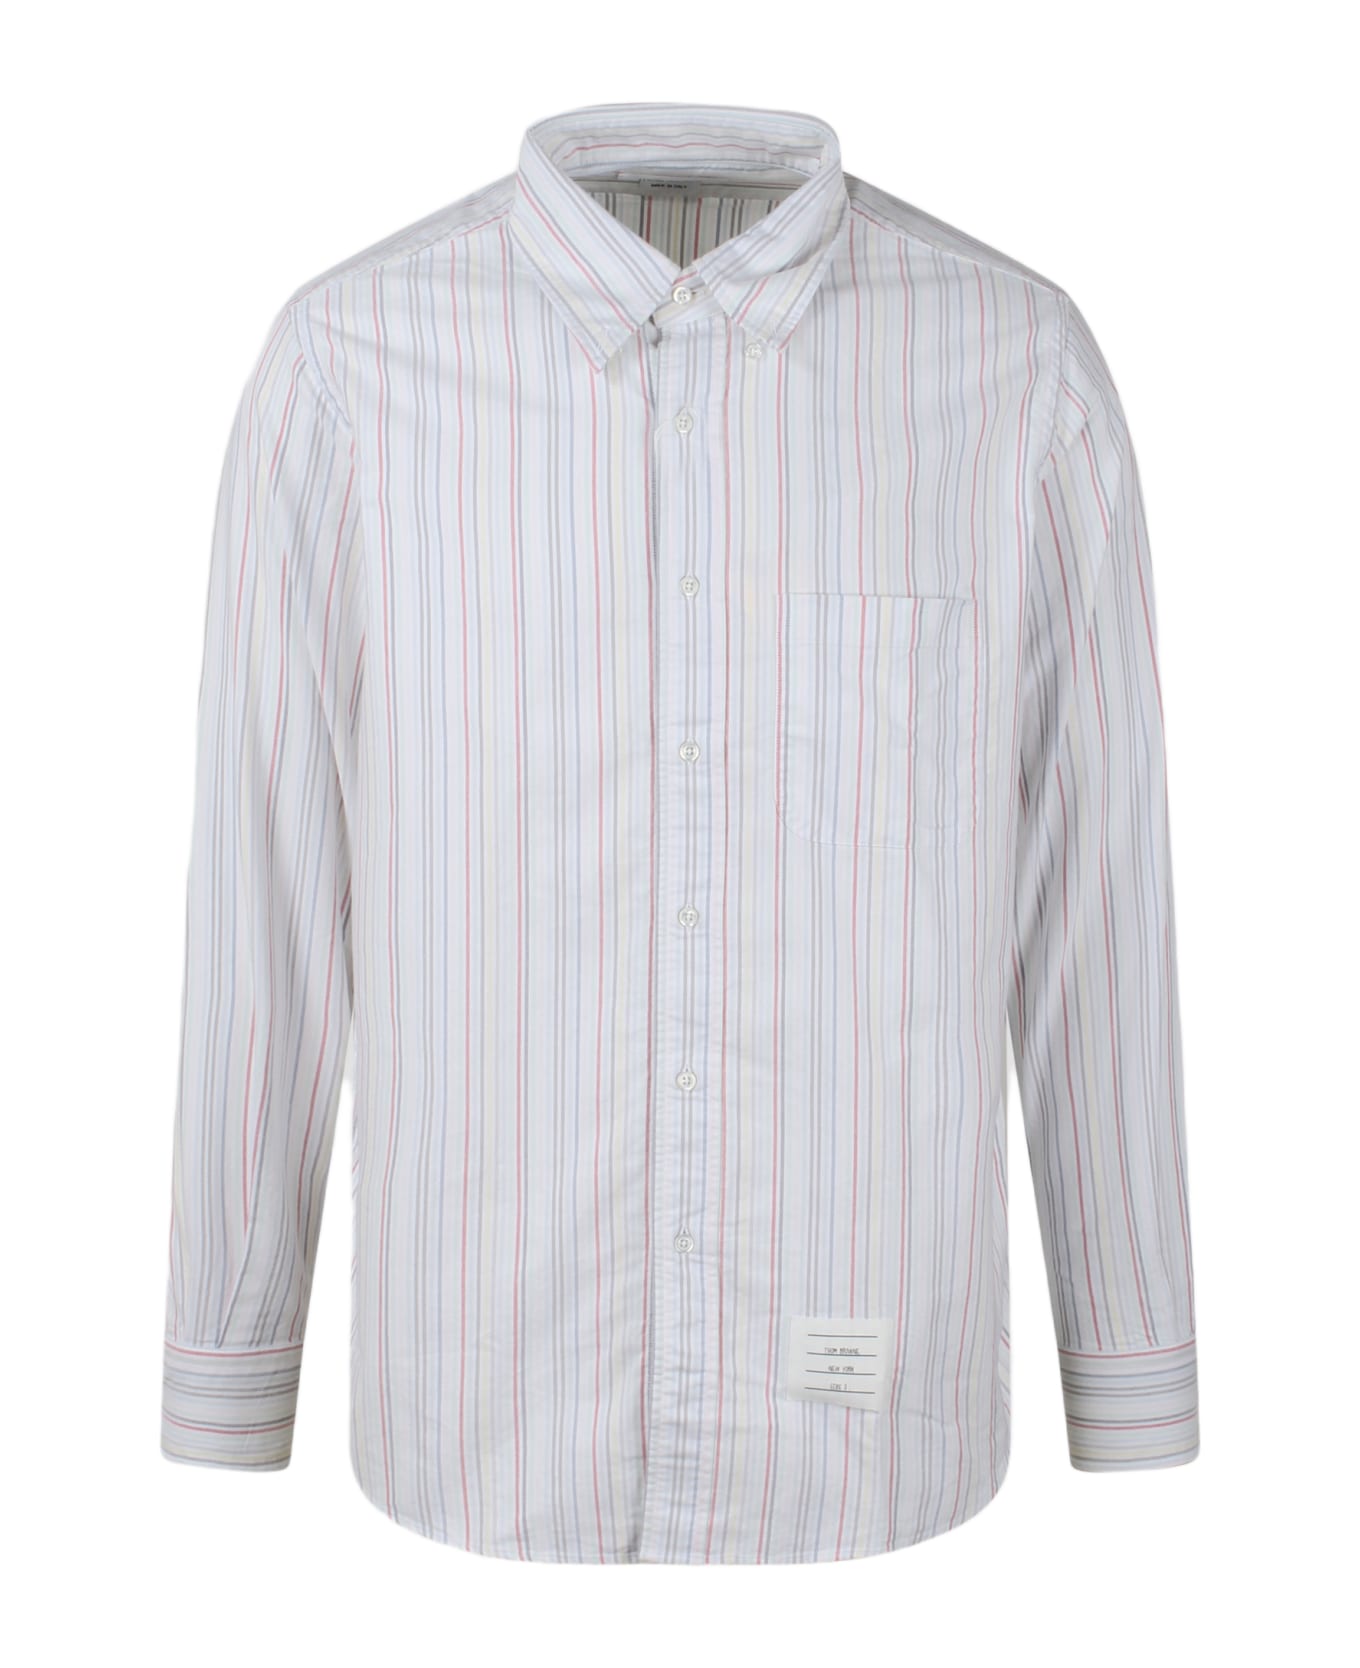 Thom Browne Straight Fit Shirt In University Stripe Oxford - Multicolour